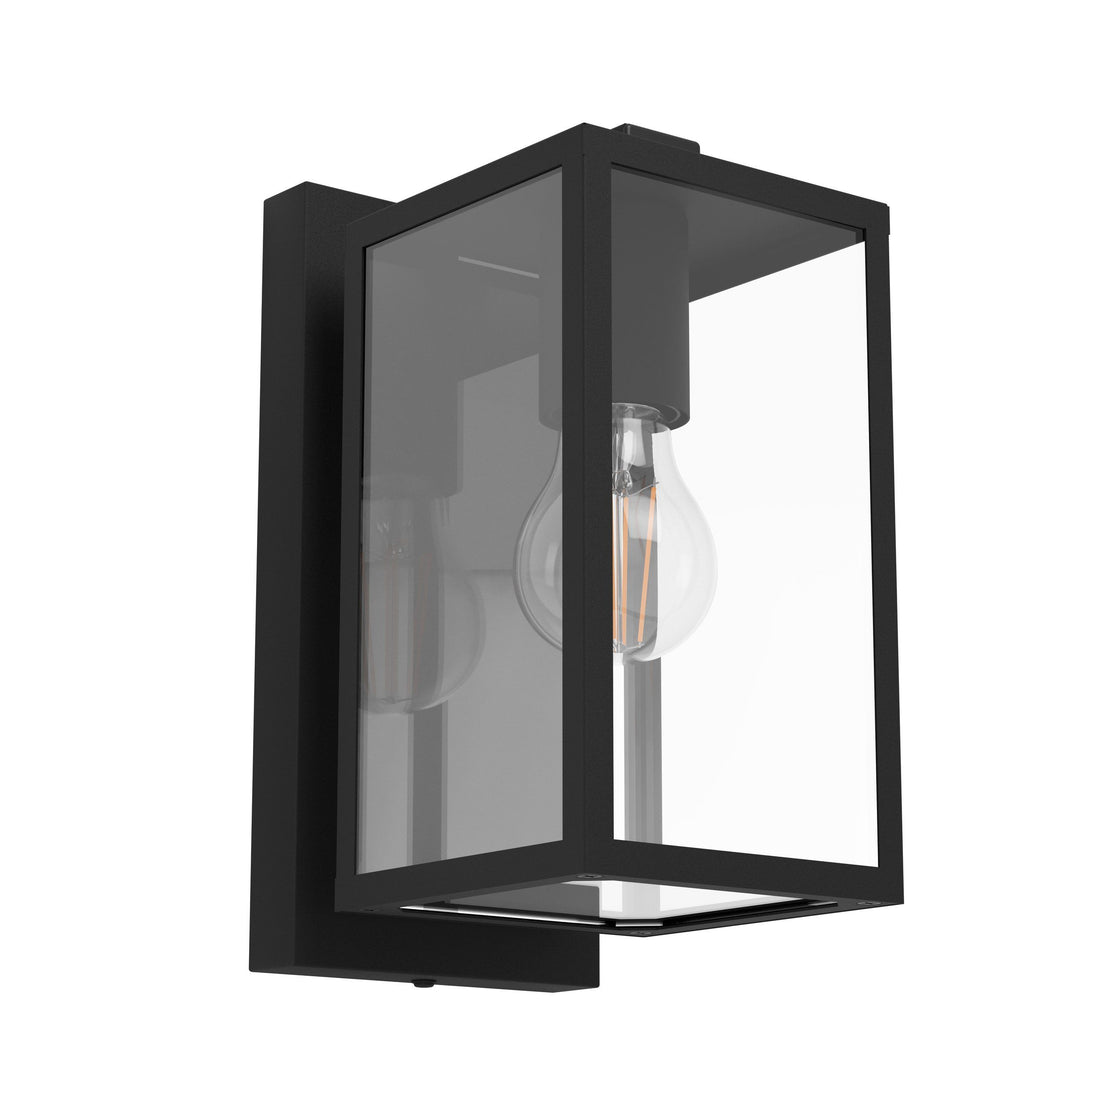 Budrone Black and Glass Modern Outdoor Coach Light